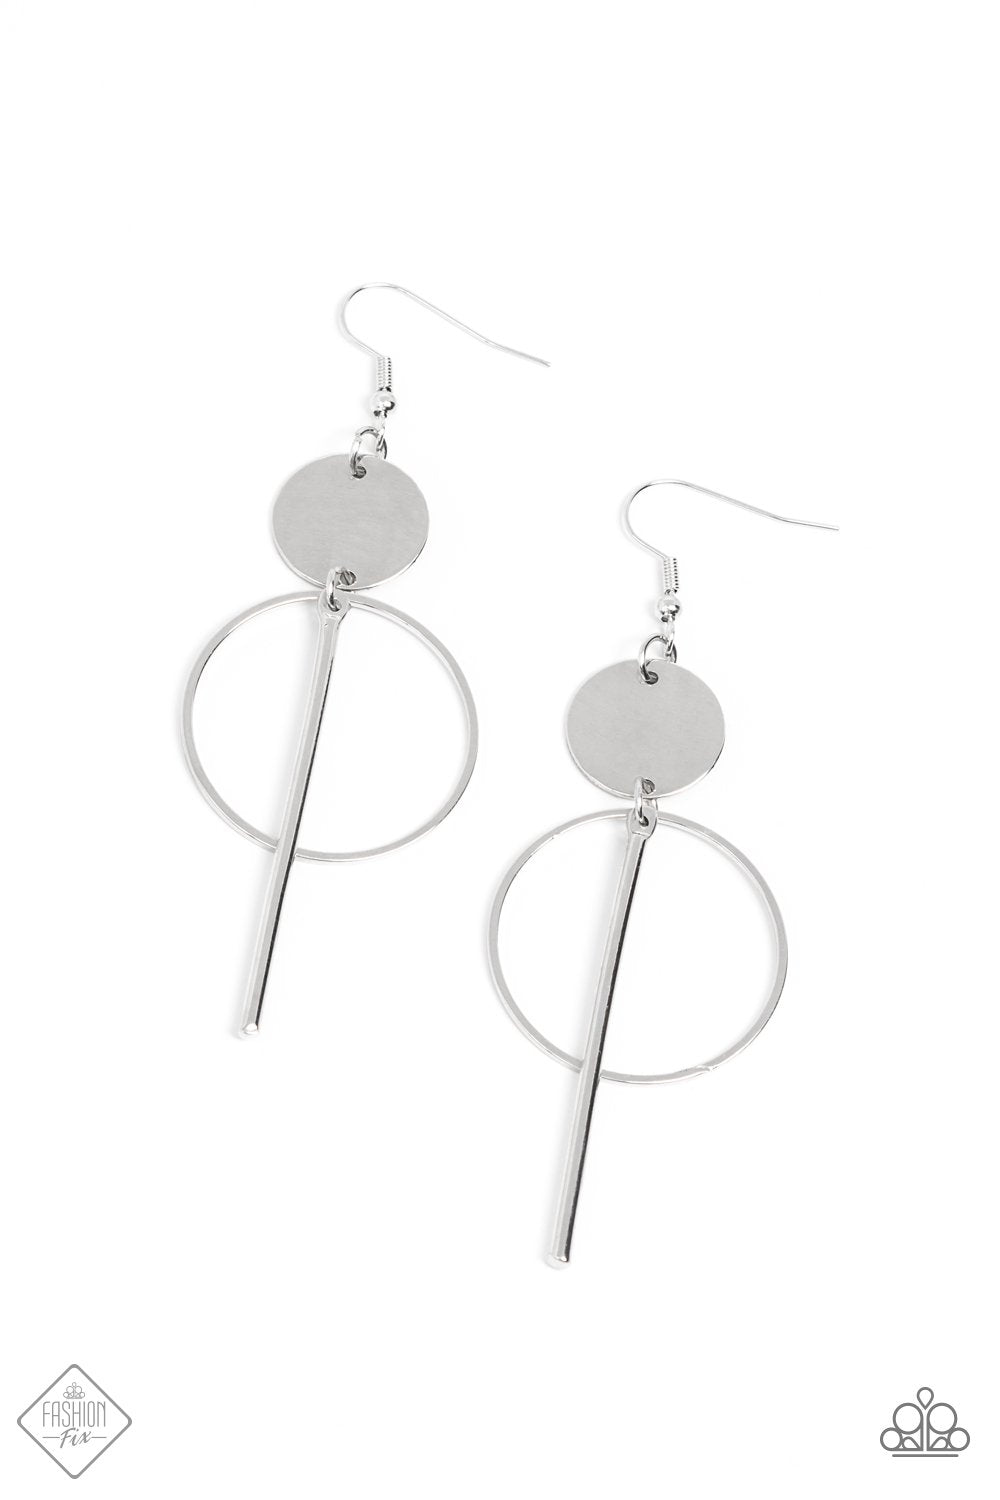 Harmoniously Balanced Silver Earrings - Paparazzi Accessories- lightbox - CarasShop.com - $5 Jewelry by Cara Jewels